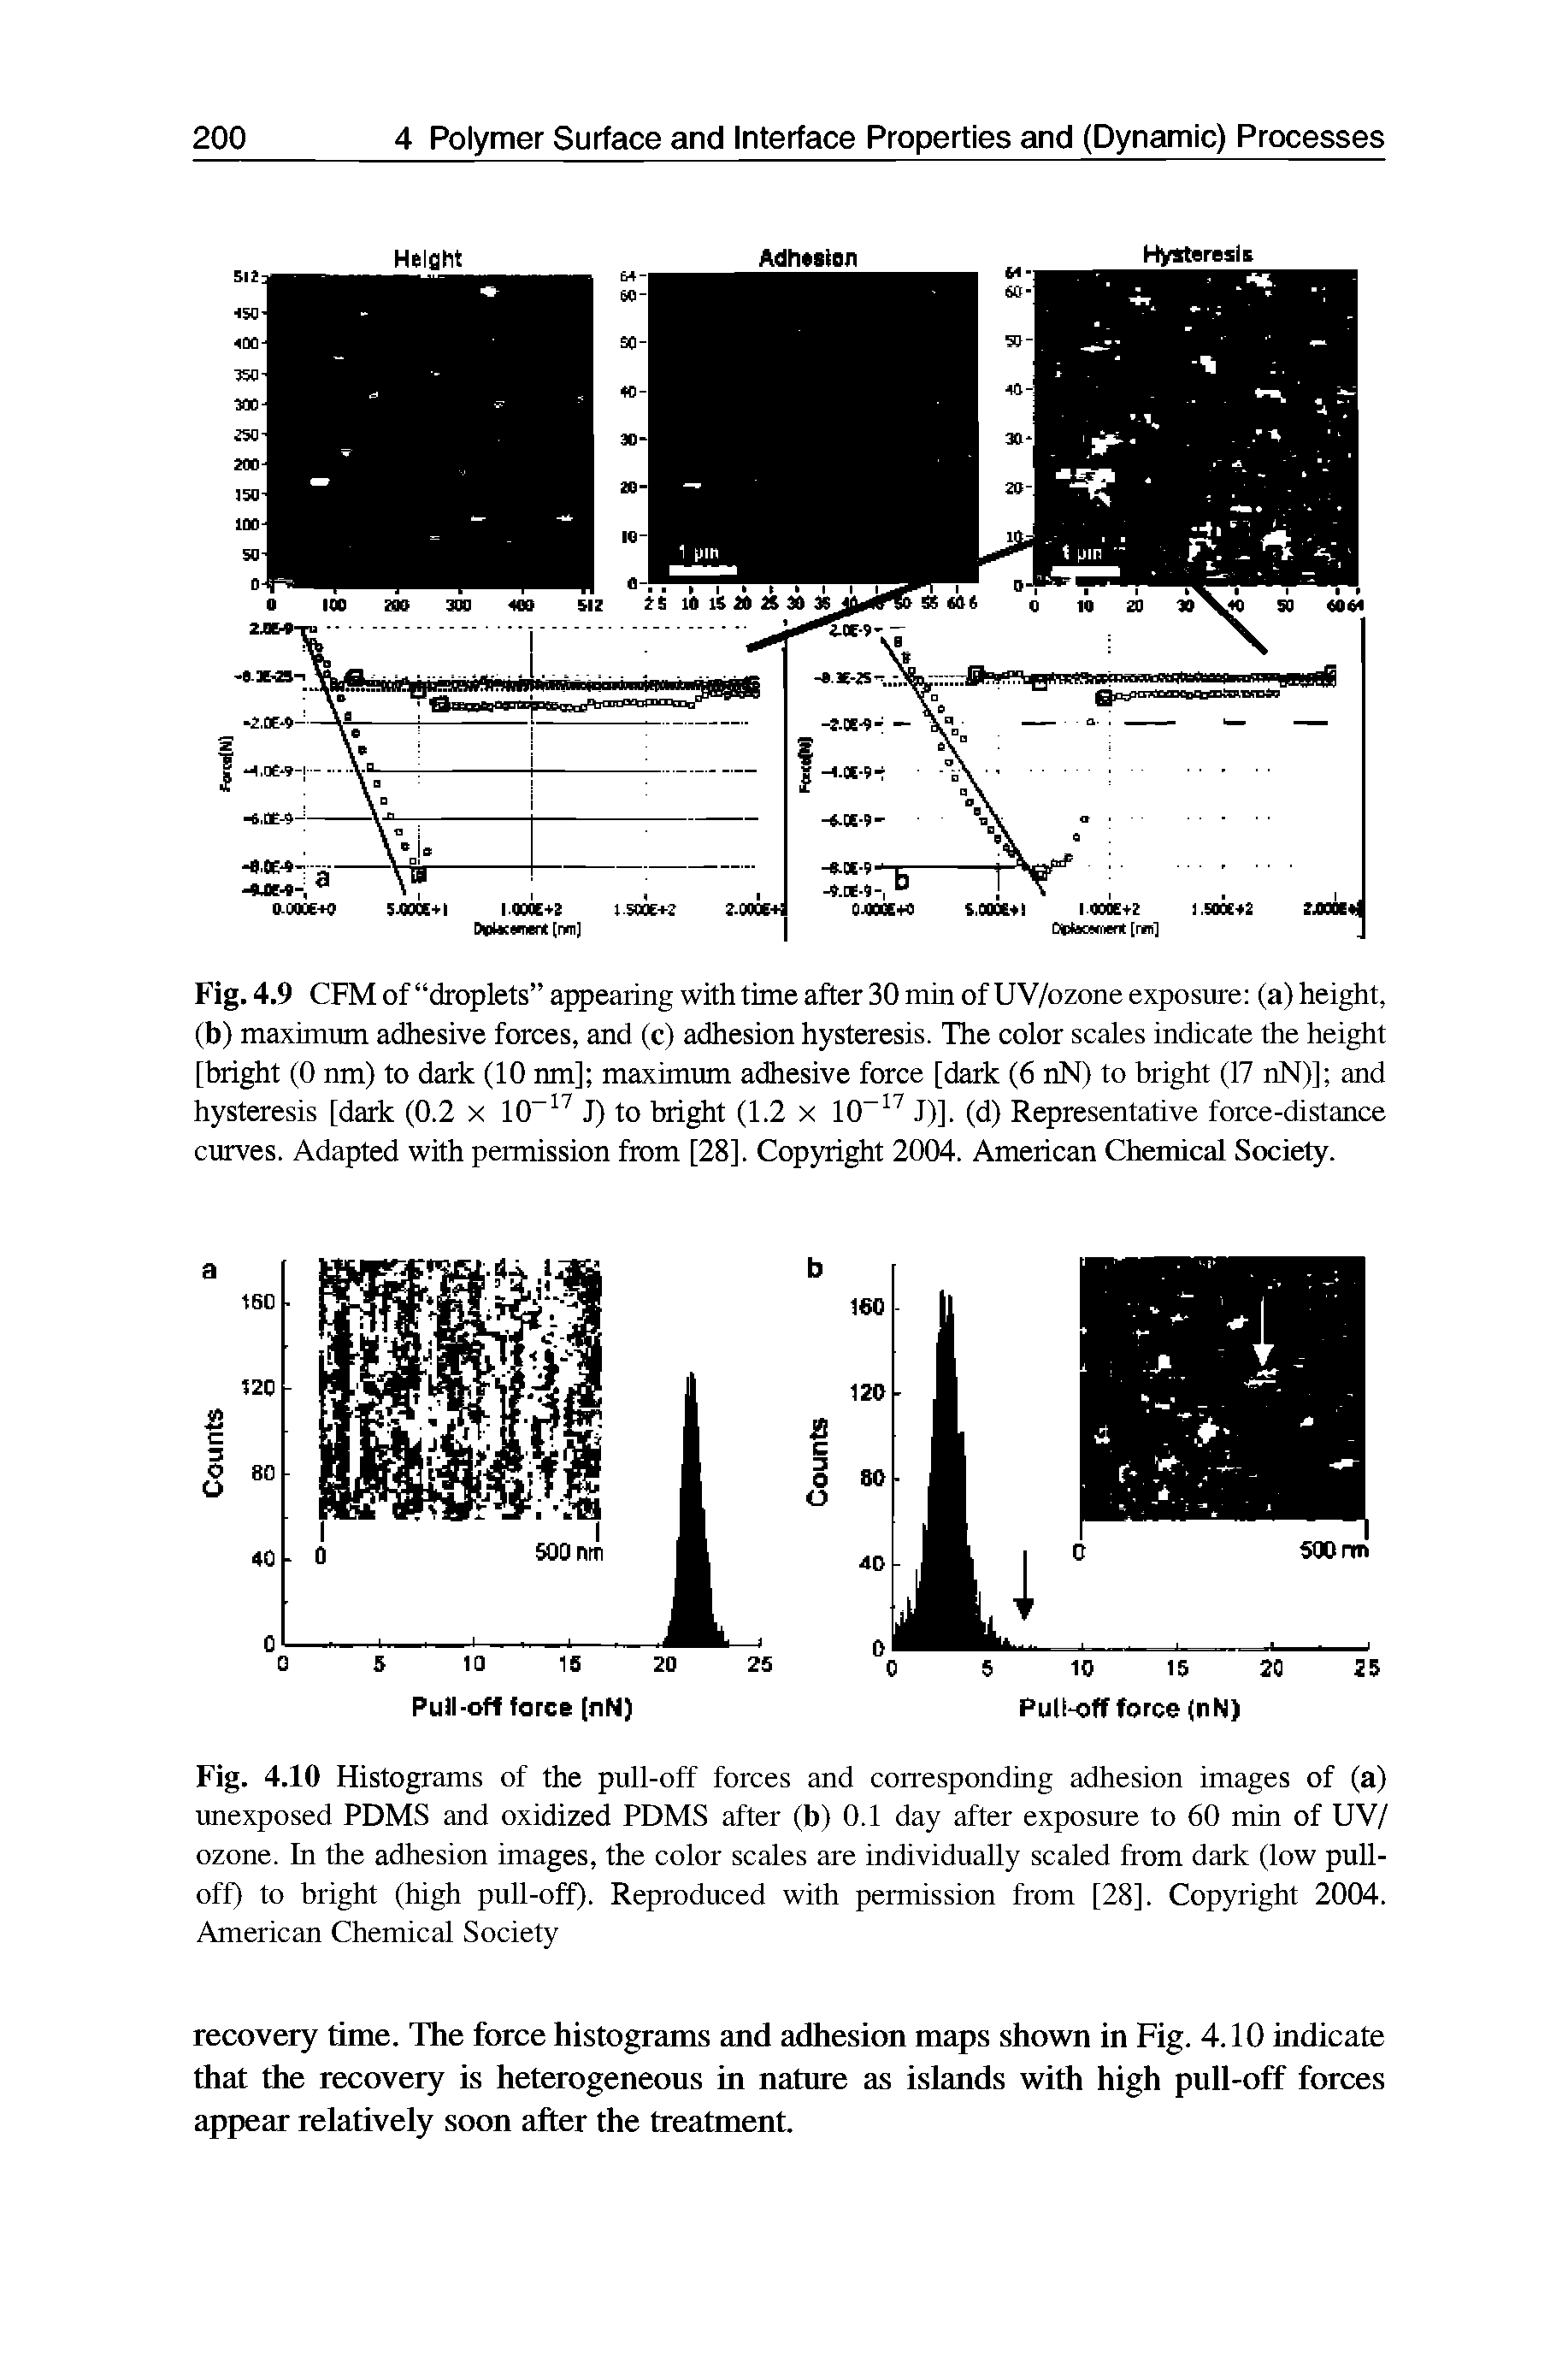 Fig. 4.9 CFM of droplets appearing with time after 30 min of UV/ozone exposure (a) height, (b) maximum adhesive forces, and (c) adhesion hysteresis. The color scales indicate the height [bright (0 nm) to dark (10 nm] maximum adhesive force [dark (6 nN) to bright (17 nN)] and hysteresis [dark (0.2 x 10-17 J) to bright (1.2 x 10-17 J)]. (d) Representative force-distance curves. Adapted with permission from [28]. Copyright 2004. American Chemical Society.